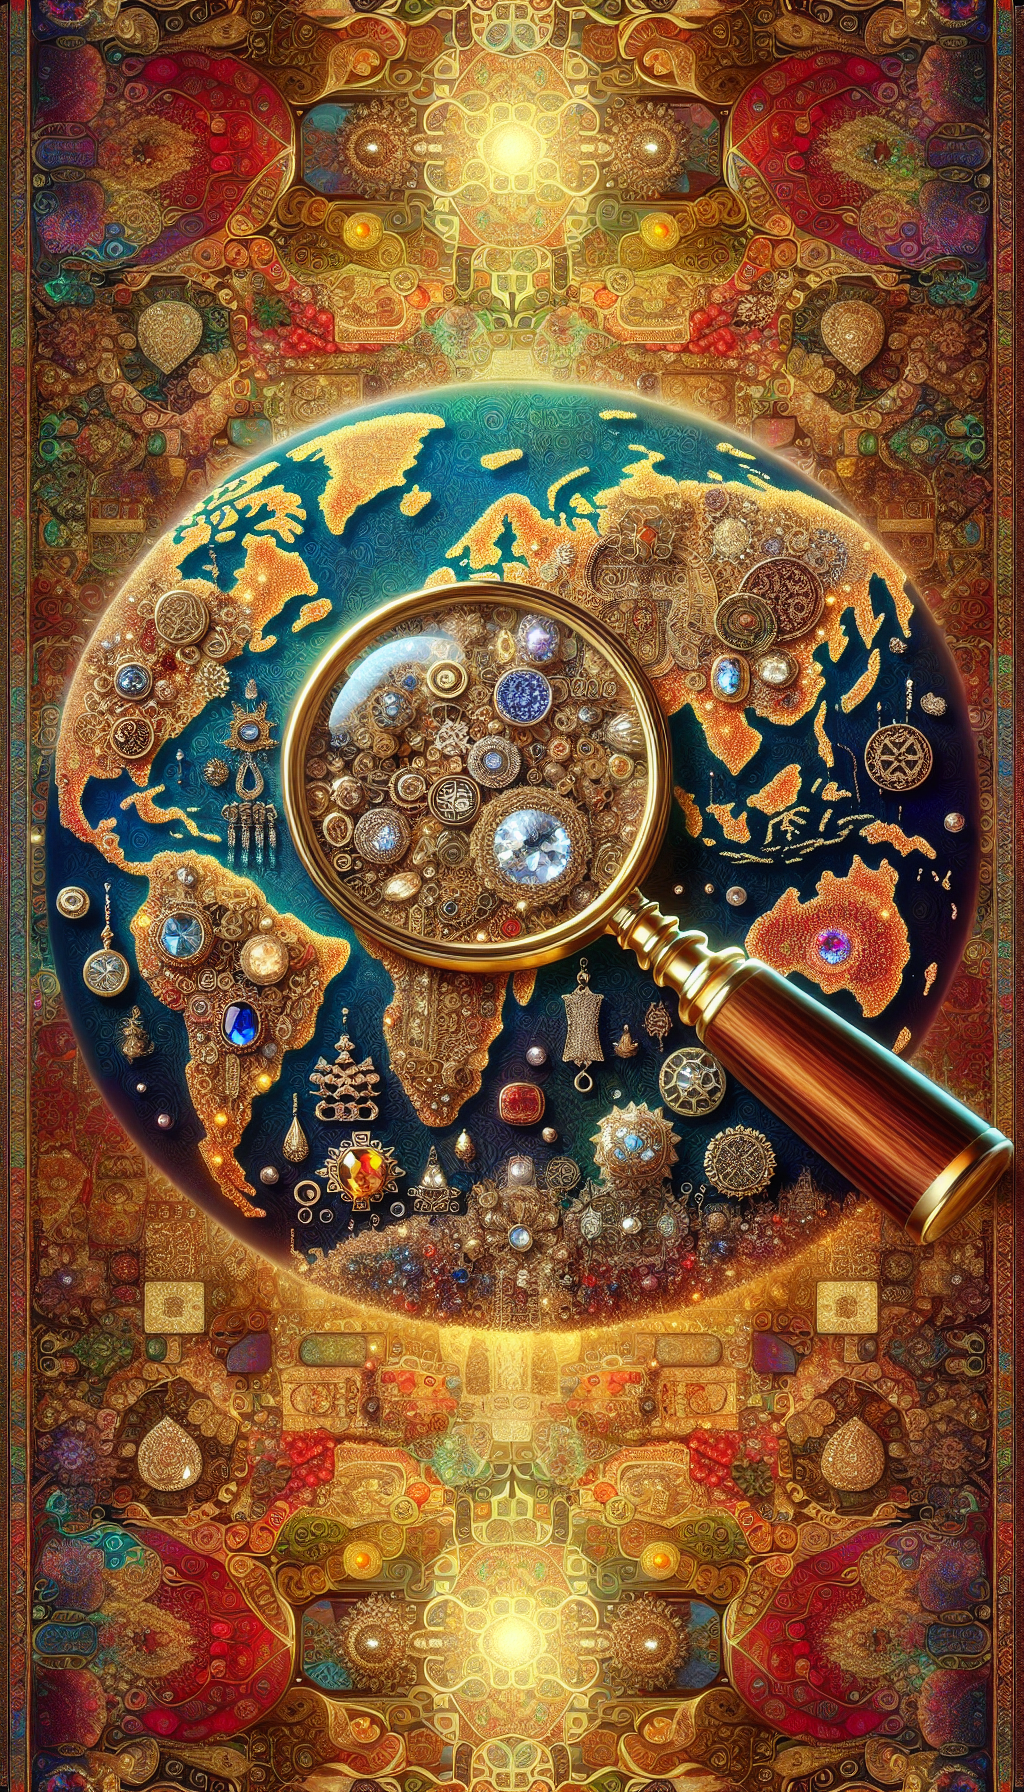 A vibrant tapestry serves as the backdrop to a magnifying glass hovering over a richly detailed map, with ornate jewelry patterned with cultural motifs of different origins scattered across the continents. Beneath the glass, the jewels sparkle with clarity, hinting at the secrets within their craftsmanship, symbolizing the quest for identification detailed in the accompanying guidebook.